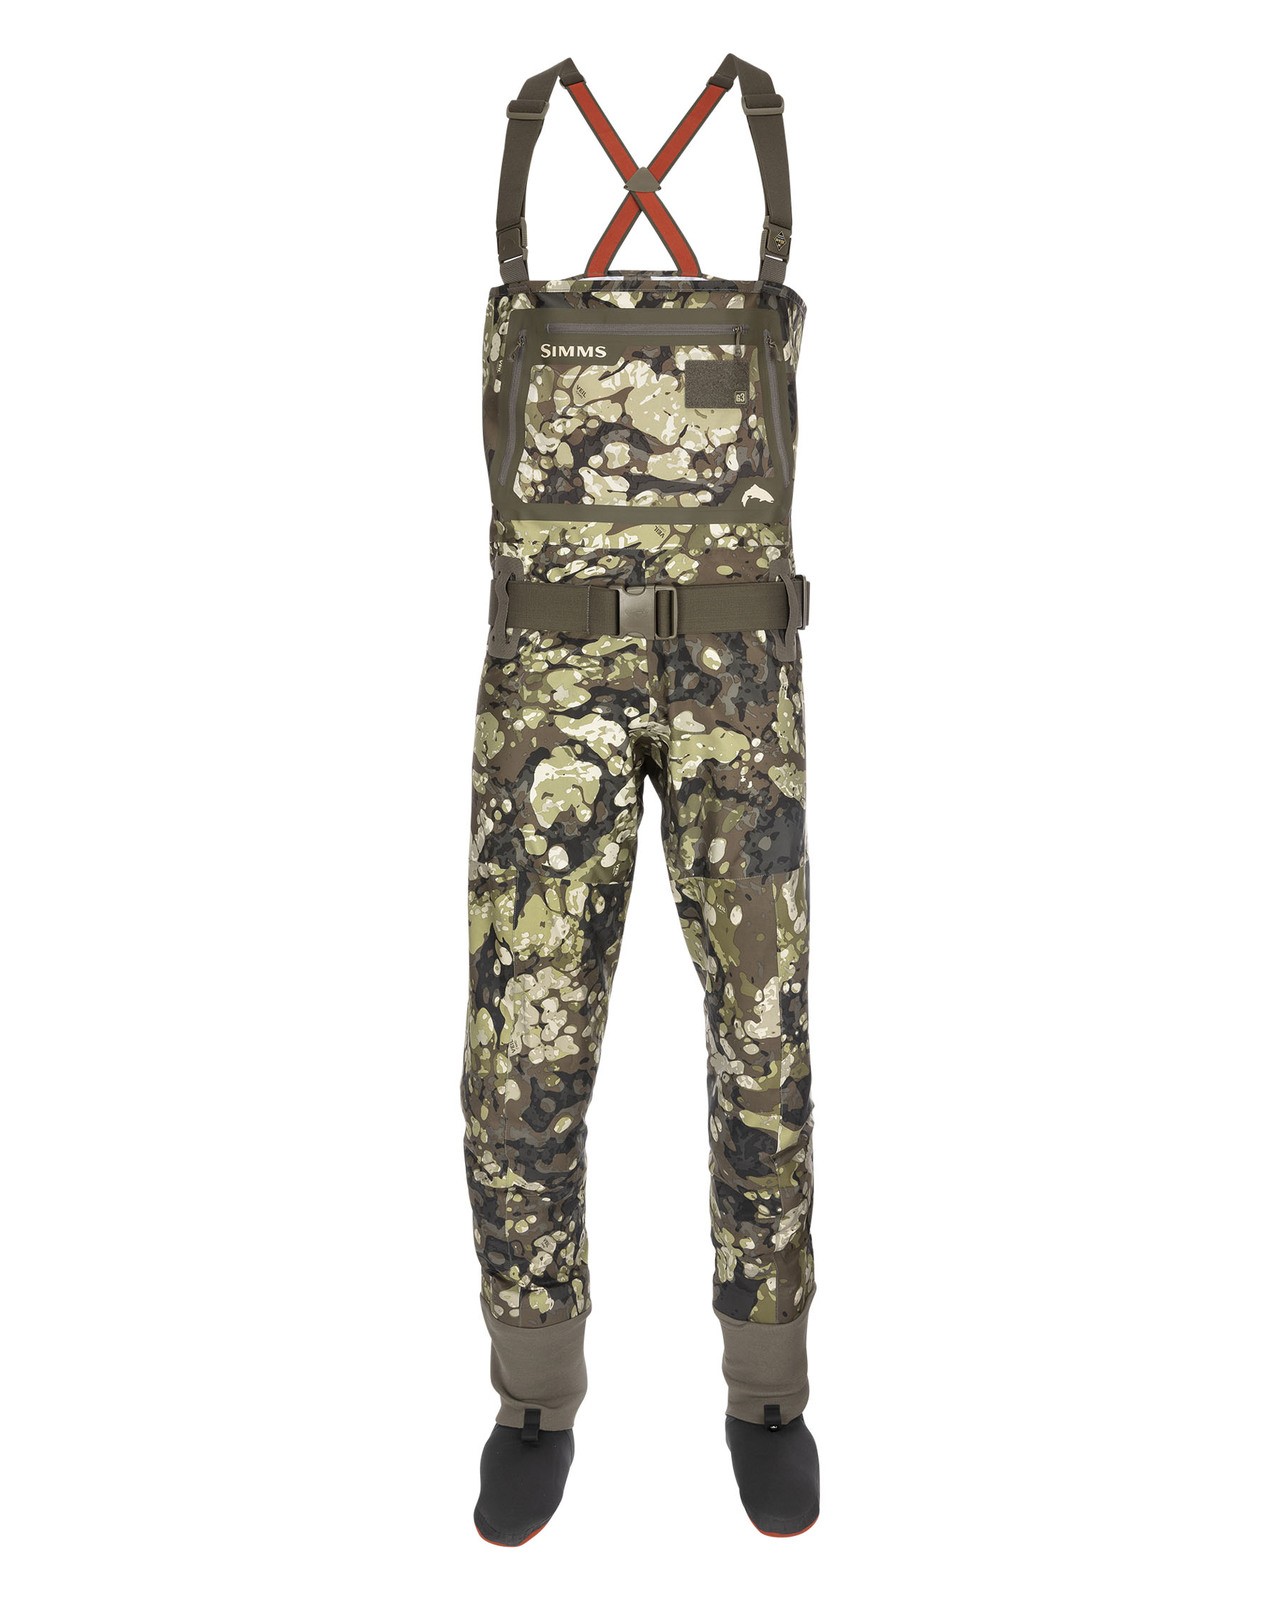 https://www.czechnymph.com/data/web/auto-imported-products/simms/simms-g3-guide-stockingfoot-riparian-camo-9fbb9579.jpg